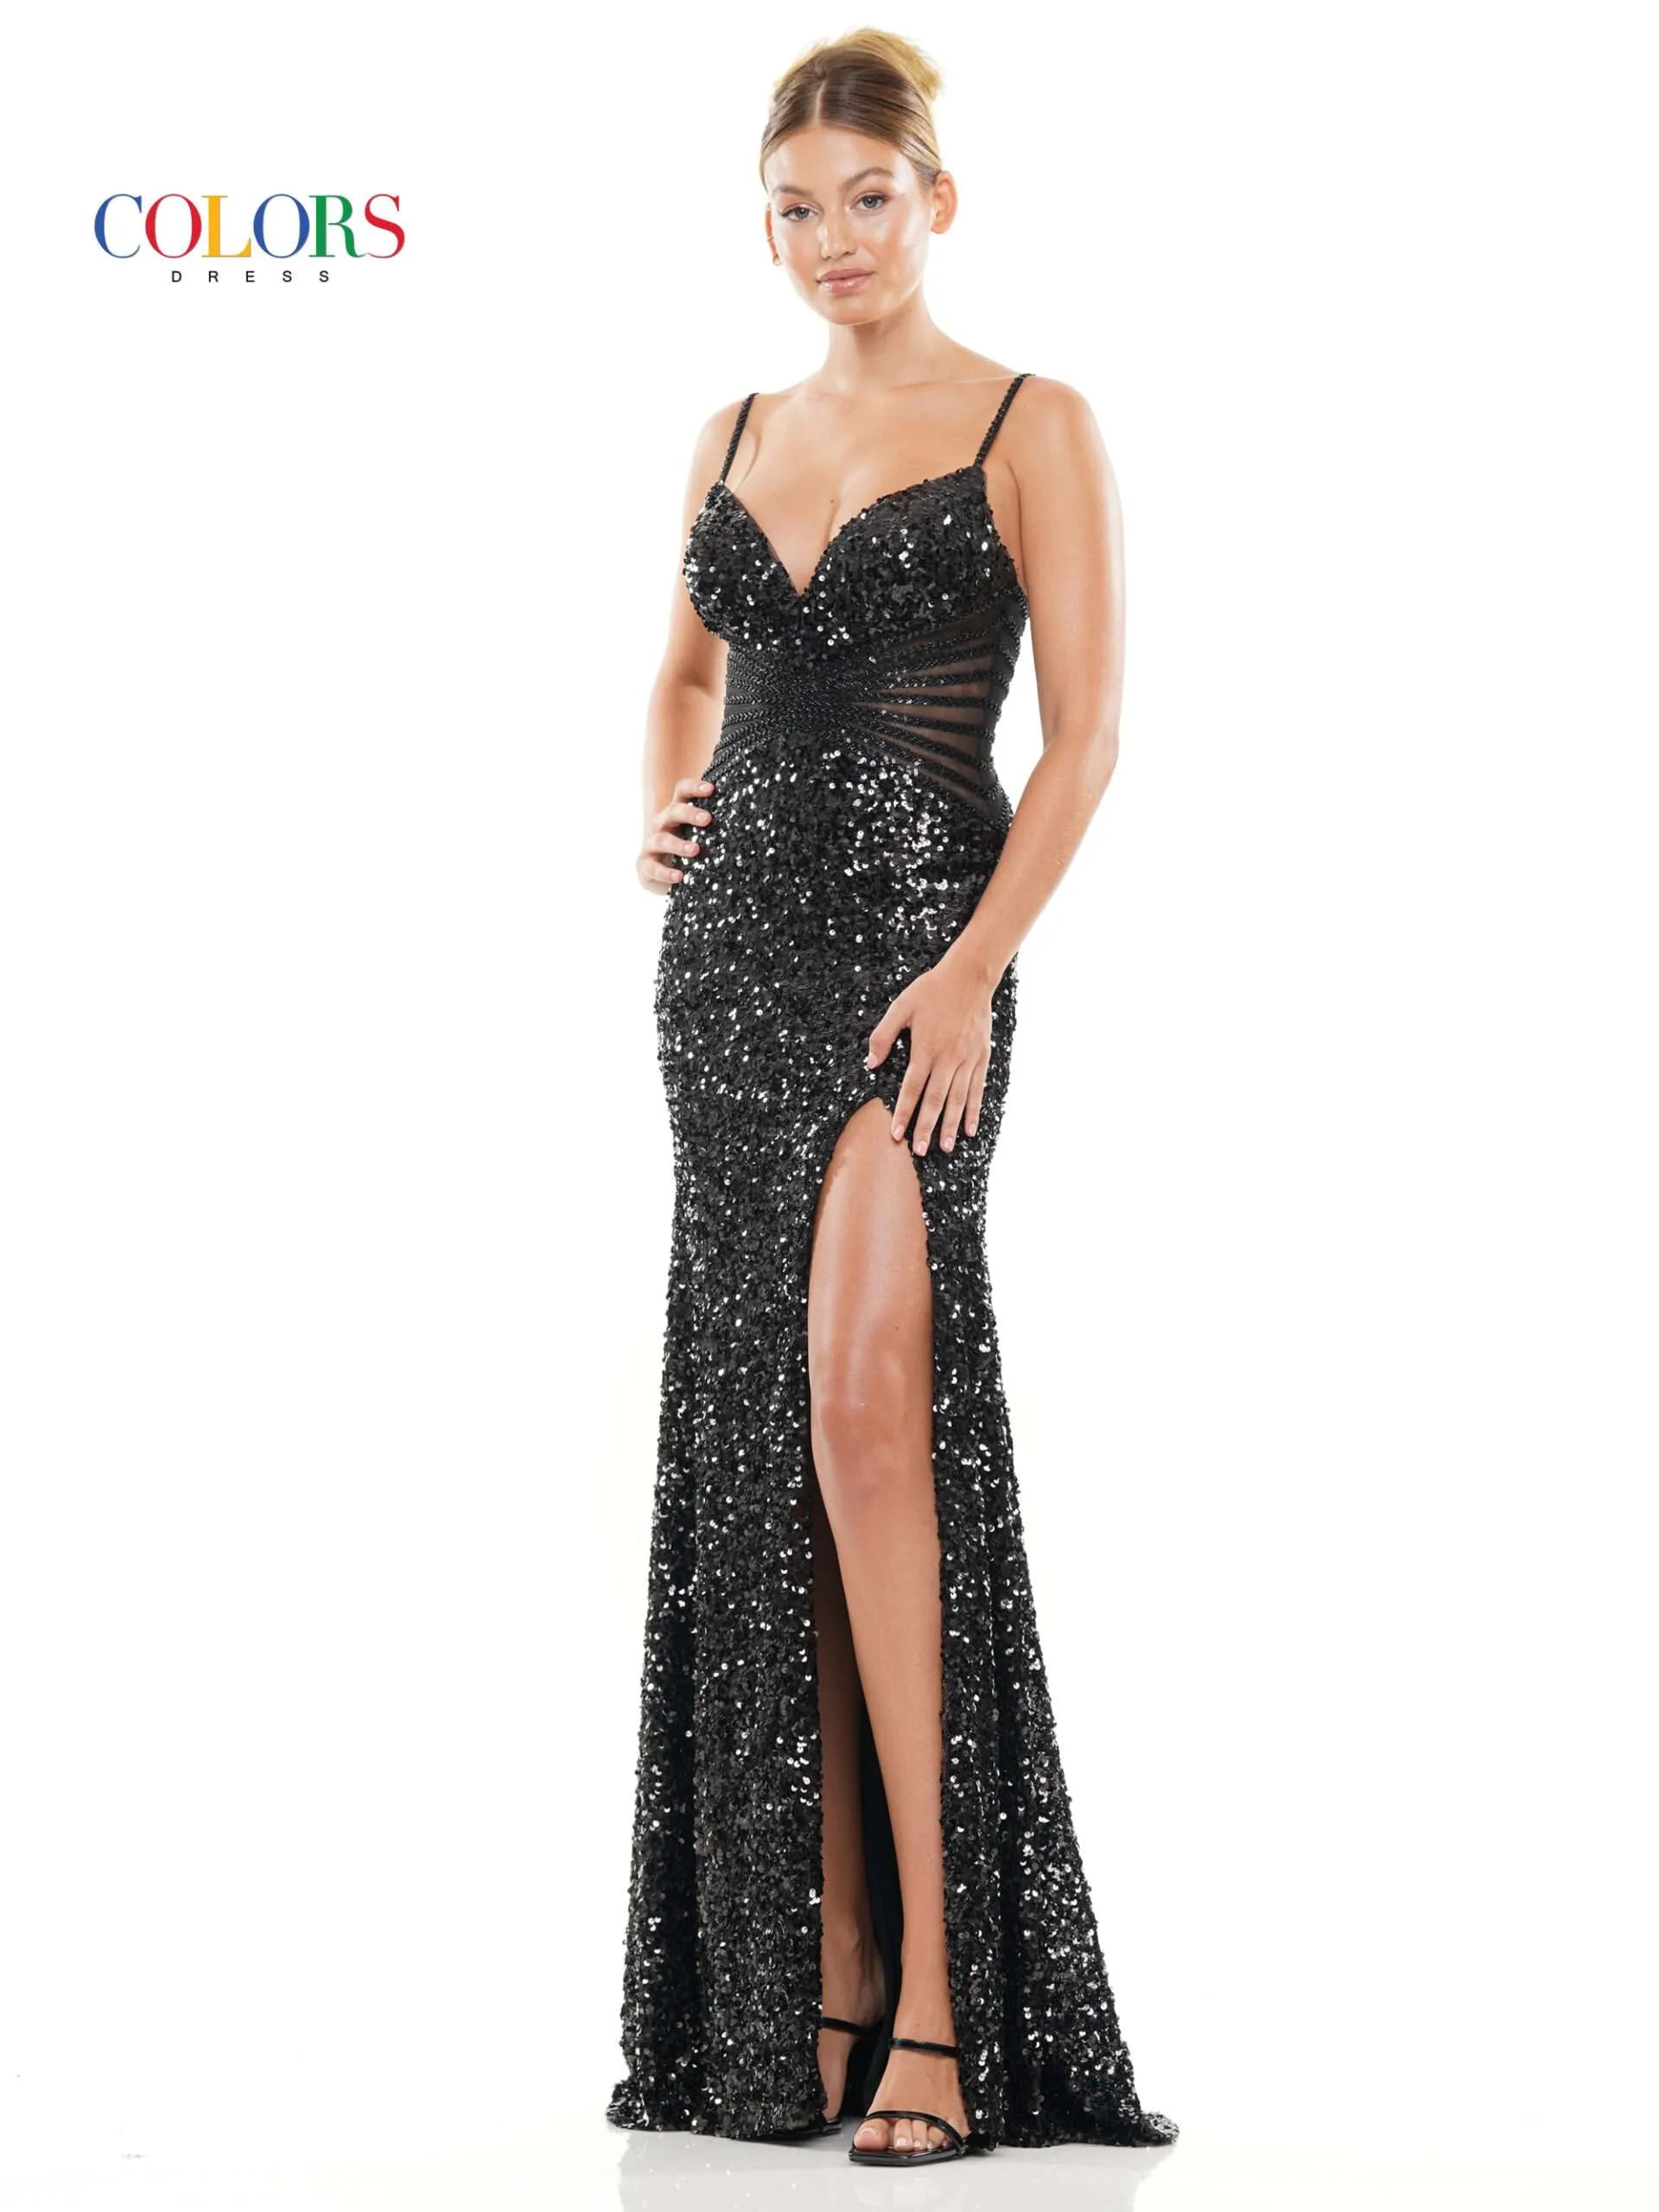 Introducing a unique, glamorous look for your next special event. Colors Dress 3300 Long Sequin Sheer Cutout Crystal Lined Prom Dress Corset Slit Gown Pageant boasts high-shine sequins, crystal-lined cutouts, and a corset-detailed back. Curve-hugging with a daring thigh-high slit, this prom dress is perfect for an unforgettable night.  Sizes: 0-20  Colors: Black, Light Blue, Deep Green, Hot Pink, Lilac